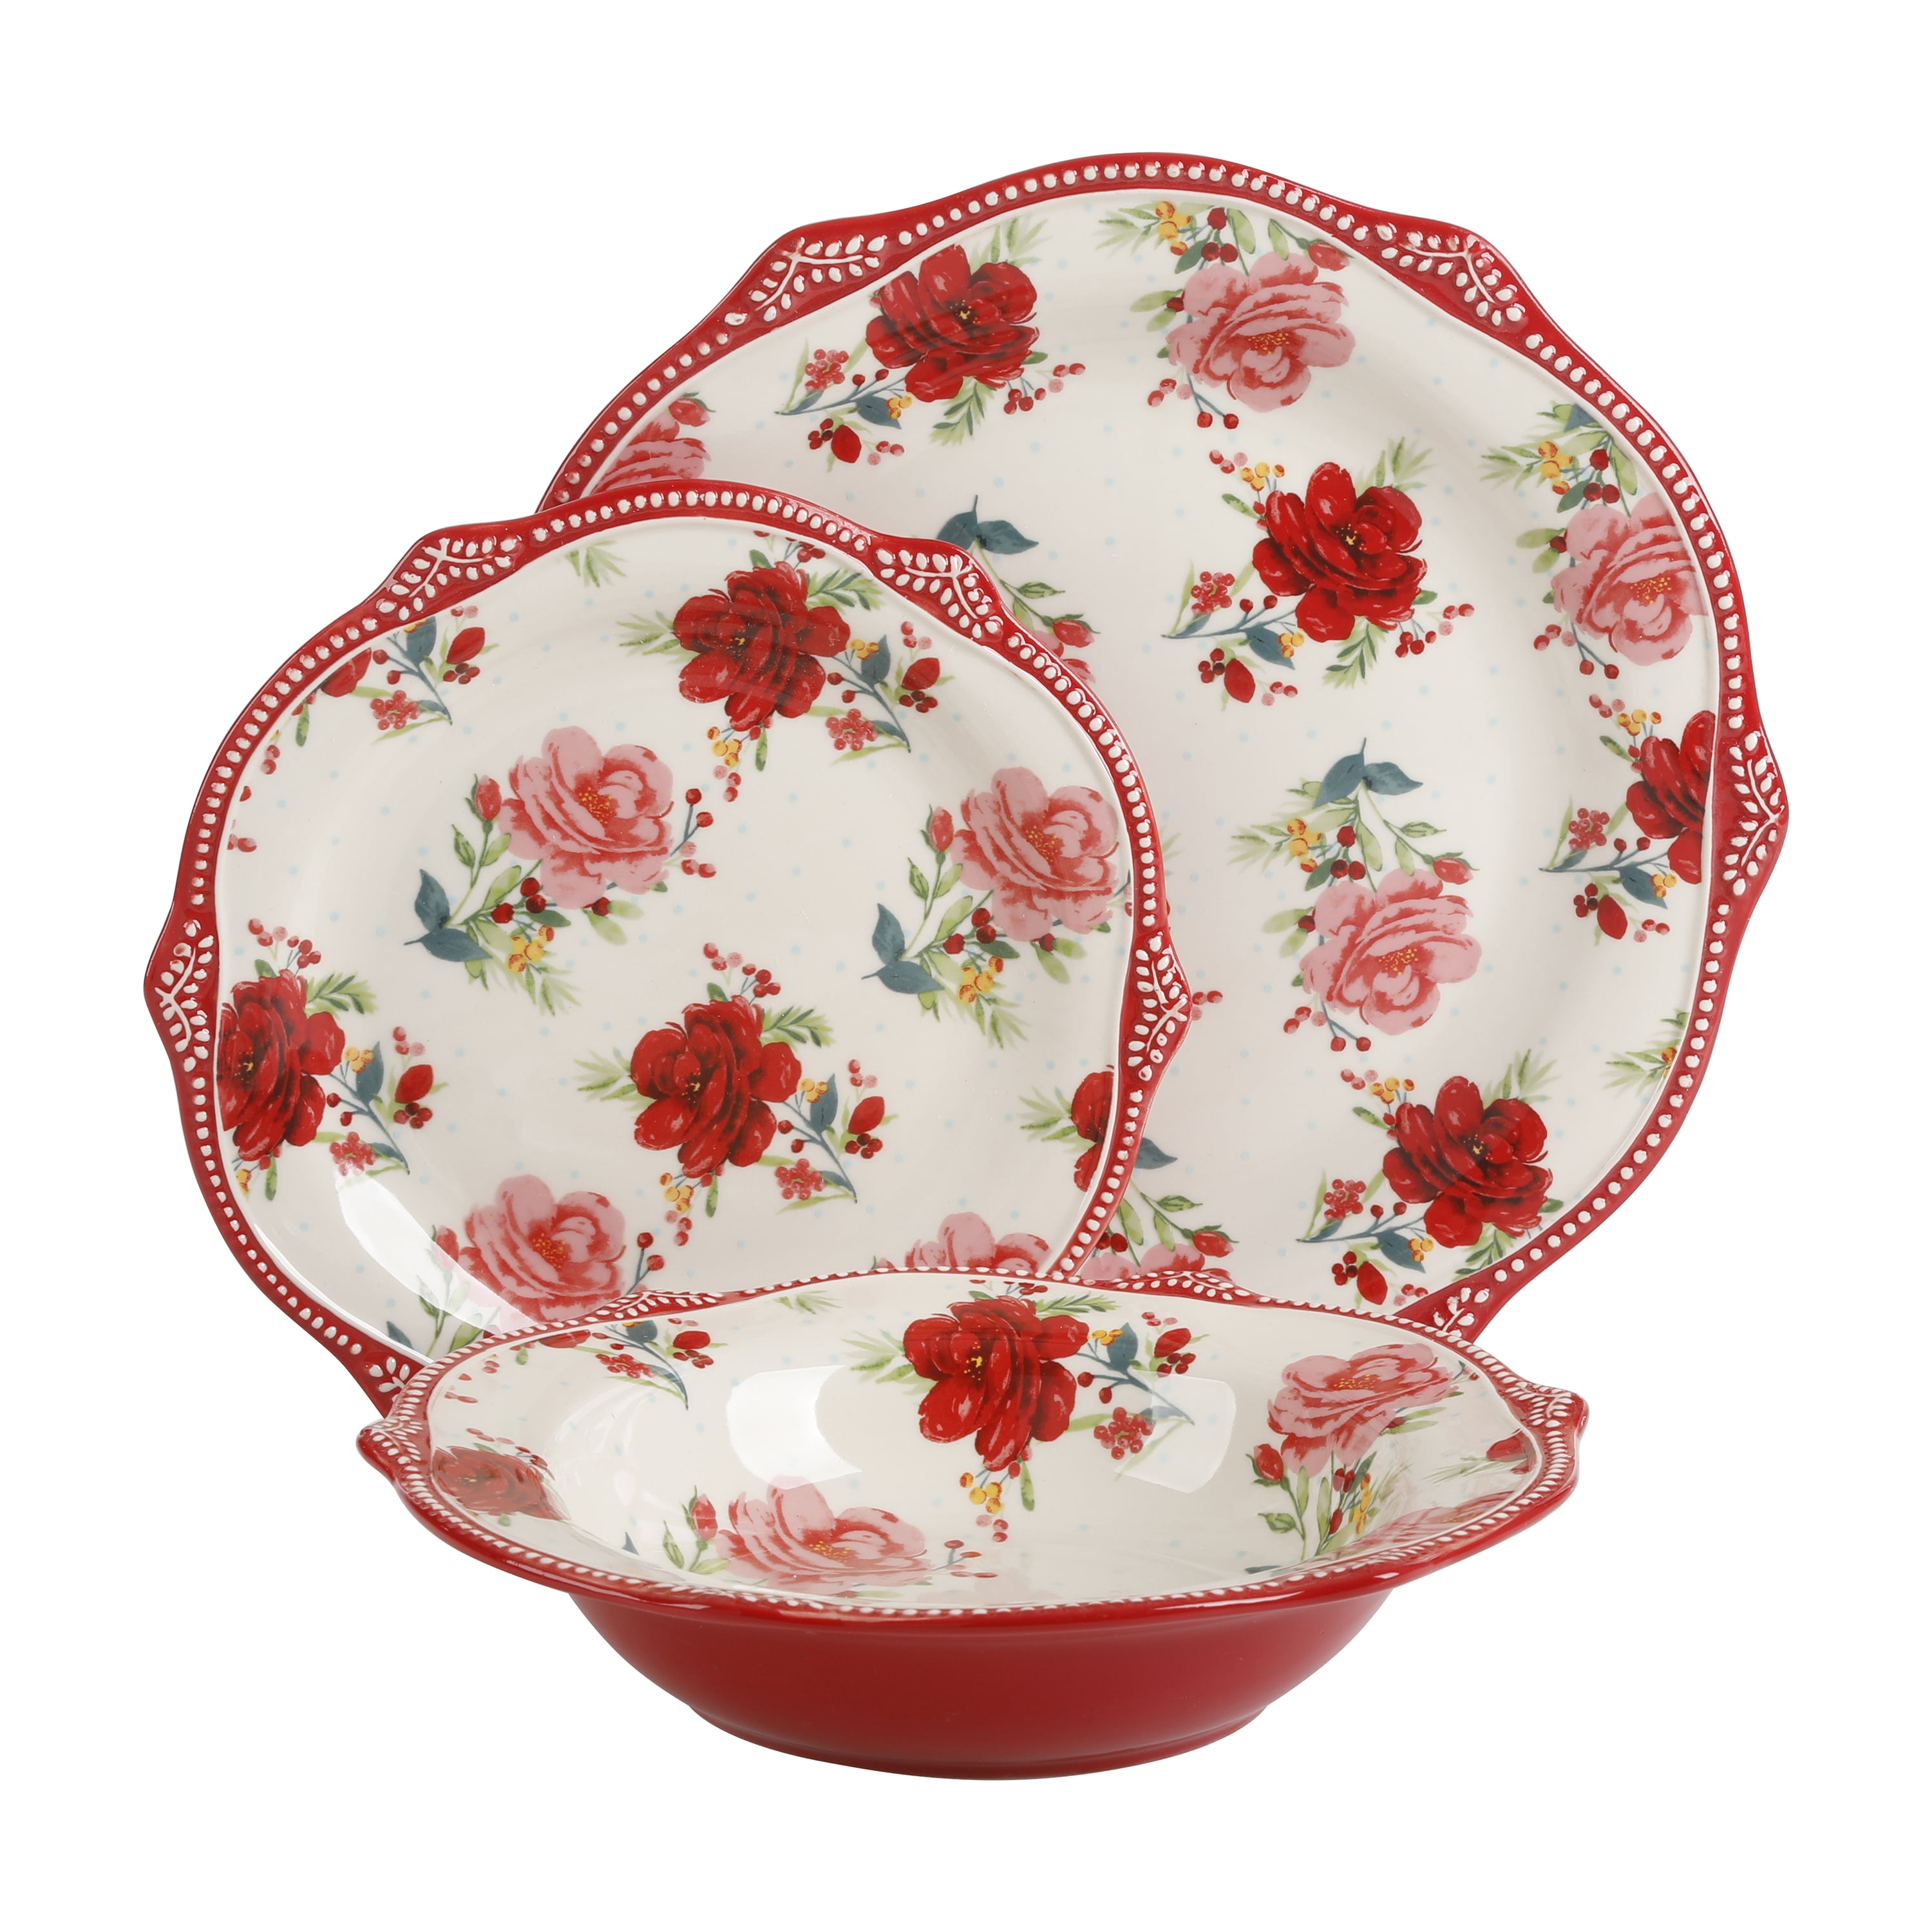 PIONEER WOMAN CHEERFUL ROSE DESIGN STONEWARE CHRISTMAS SHARING PLATE 12" RED 